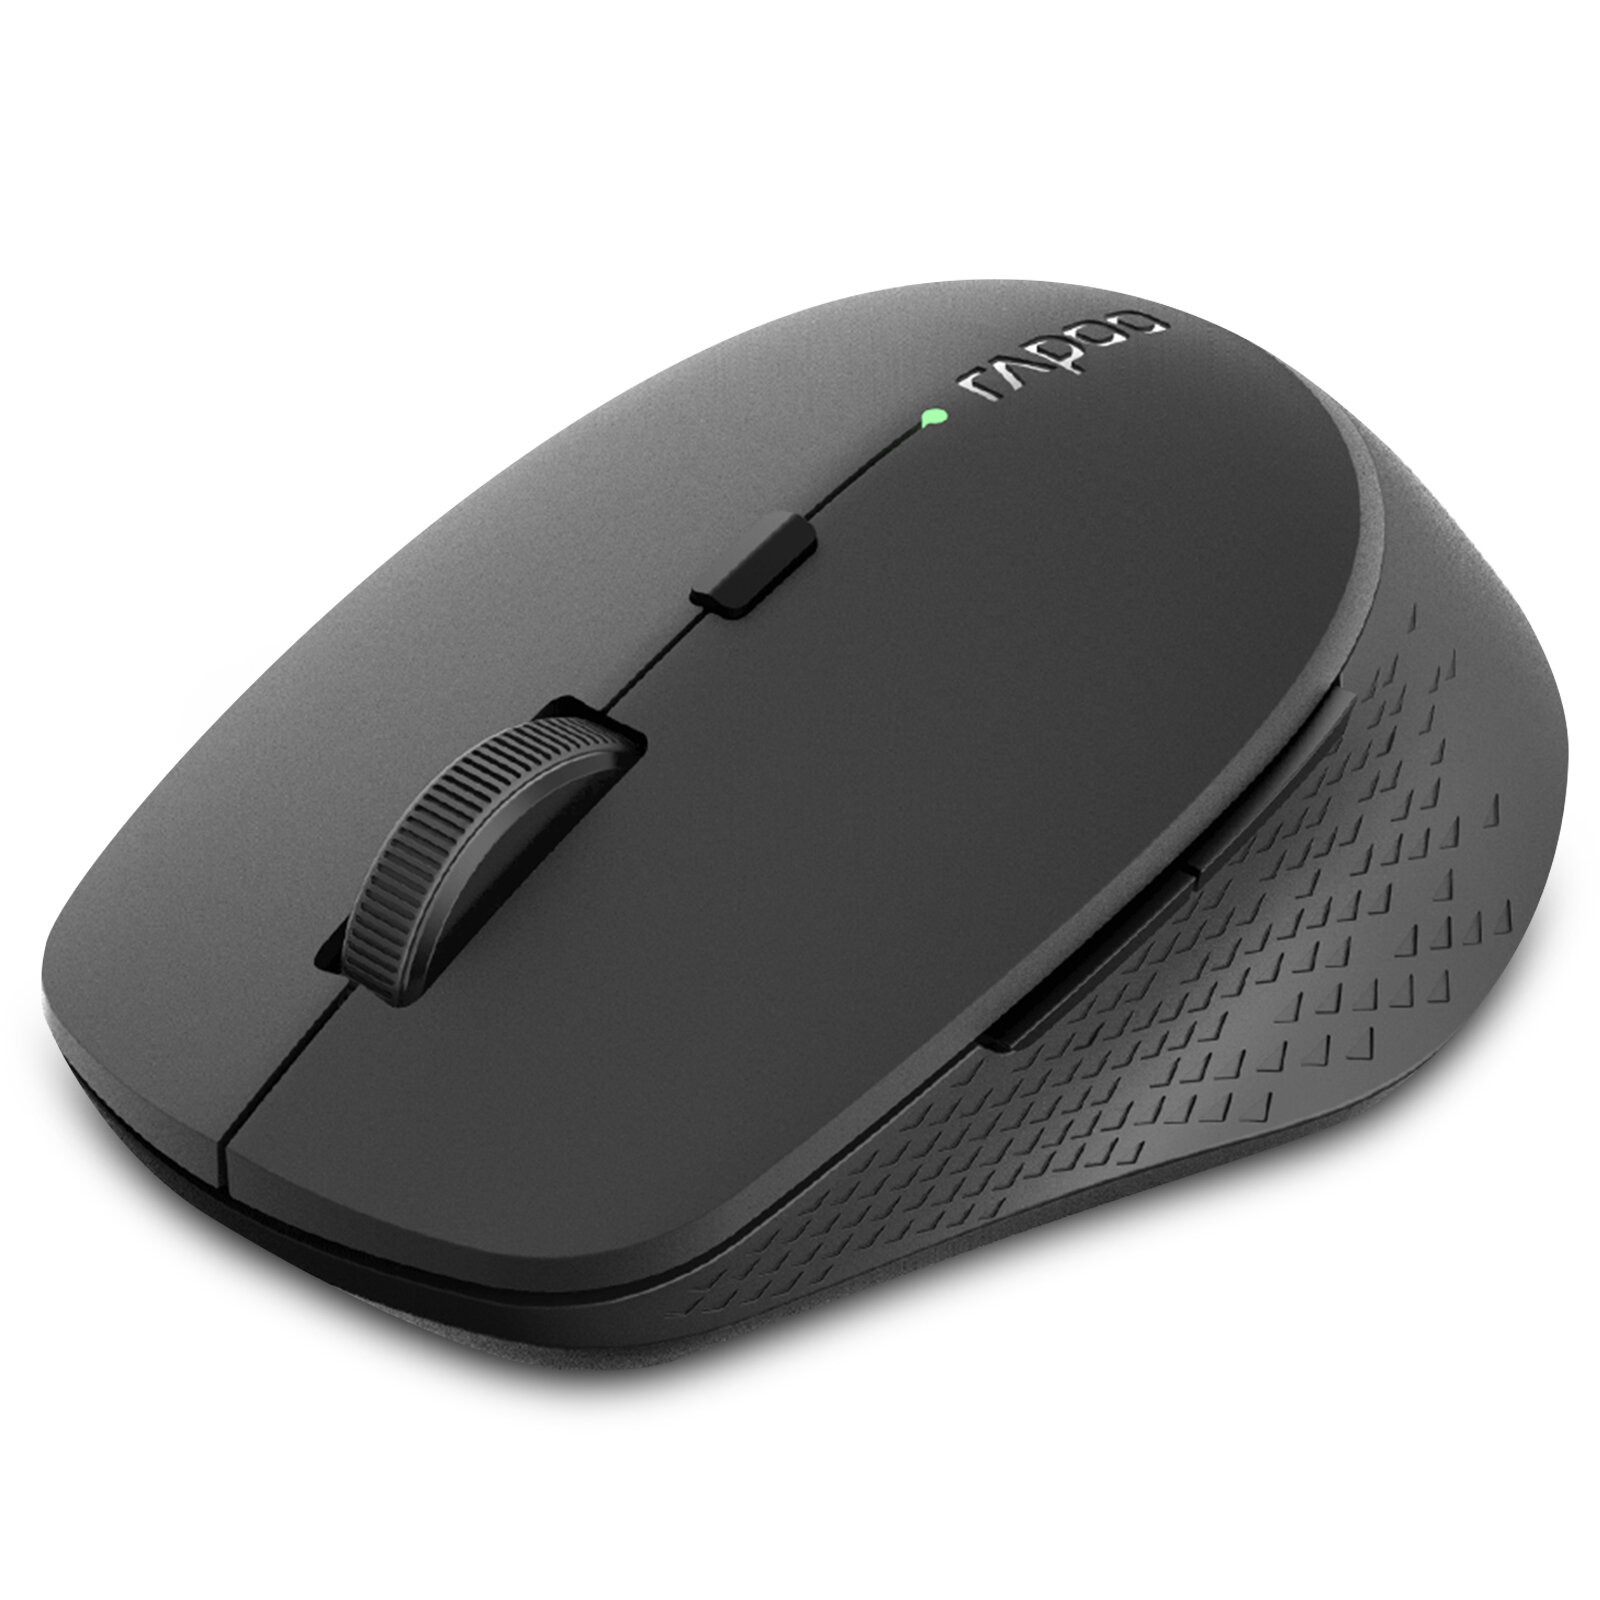 best price,rapoo,wireless,mouse,m300g,discount